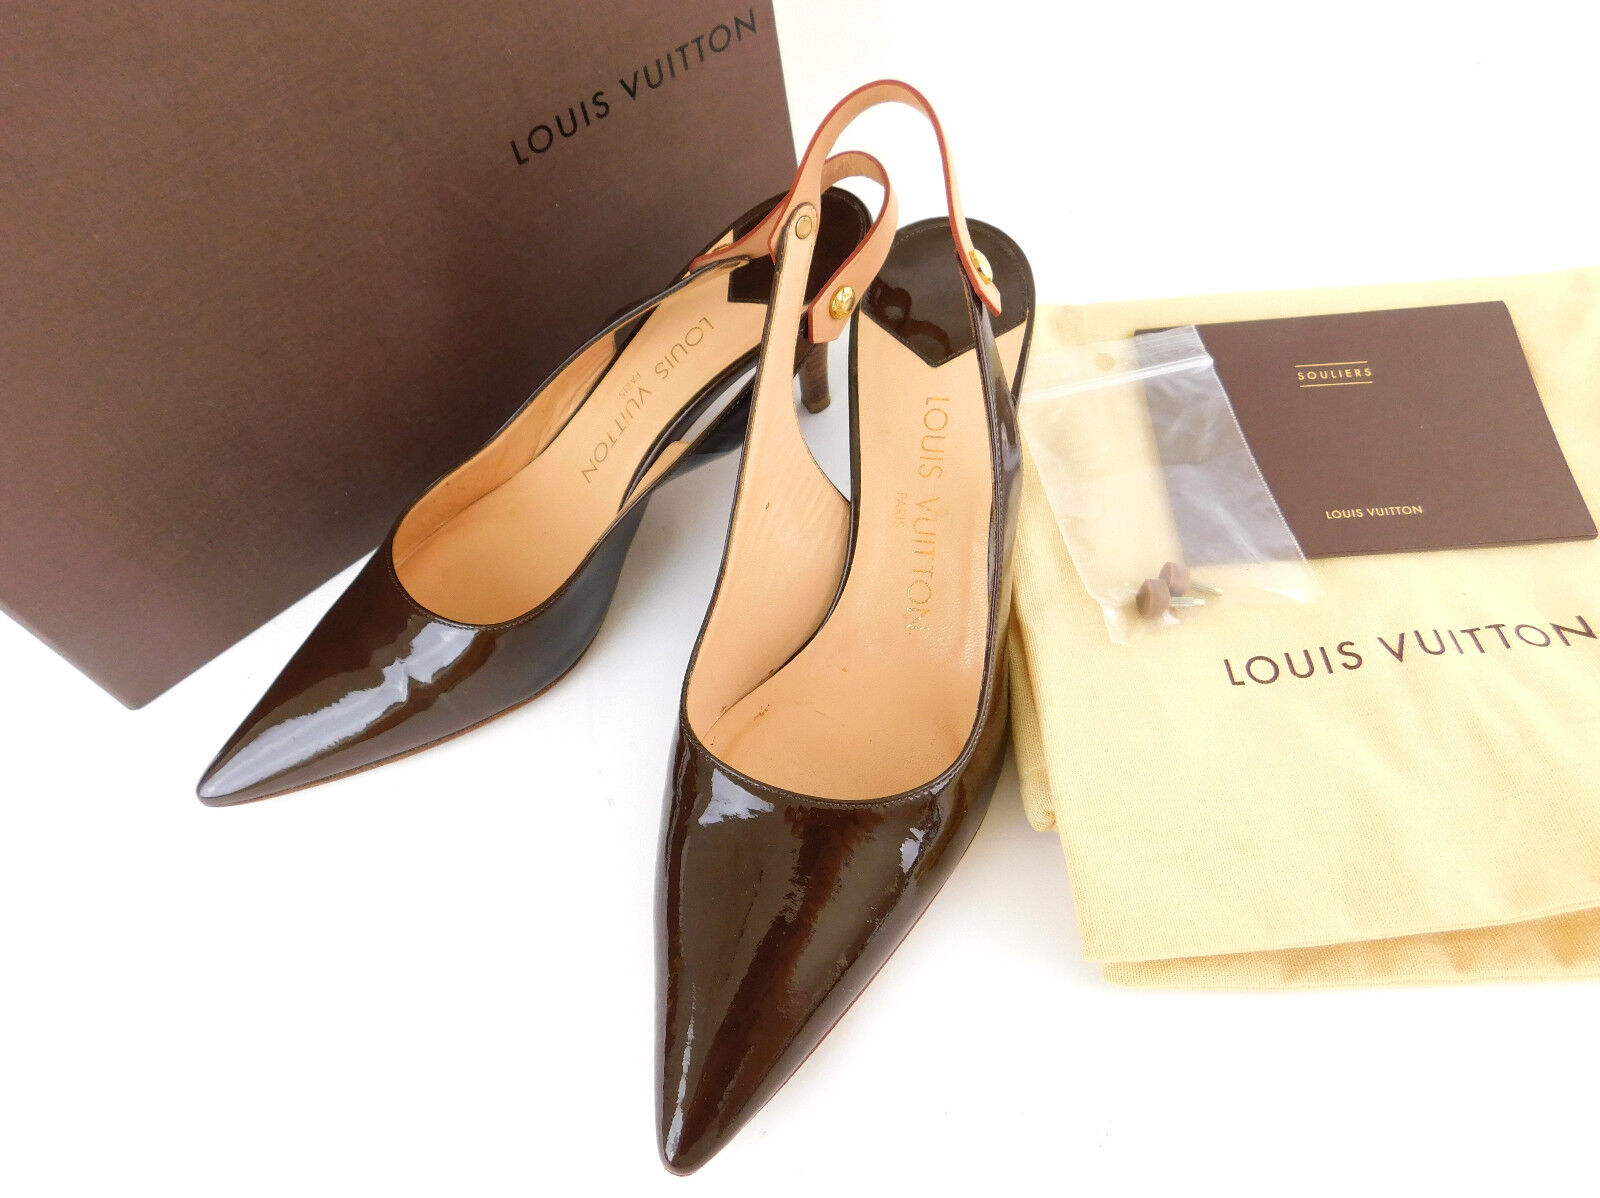 Louis Vuitton brown patent leather sling back heels 39.5 Authenticated